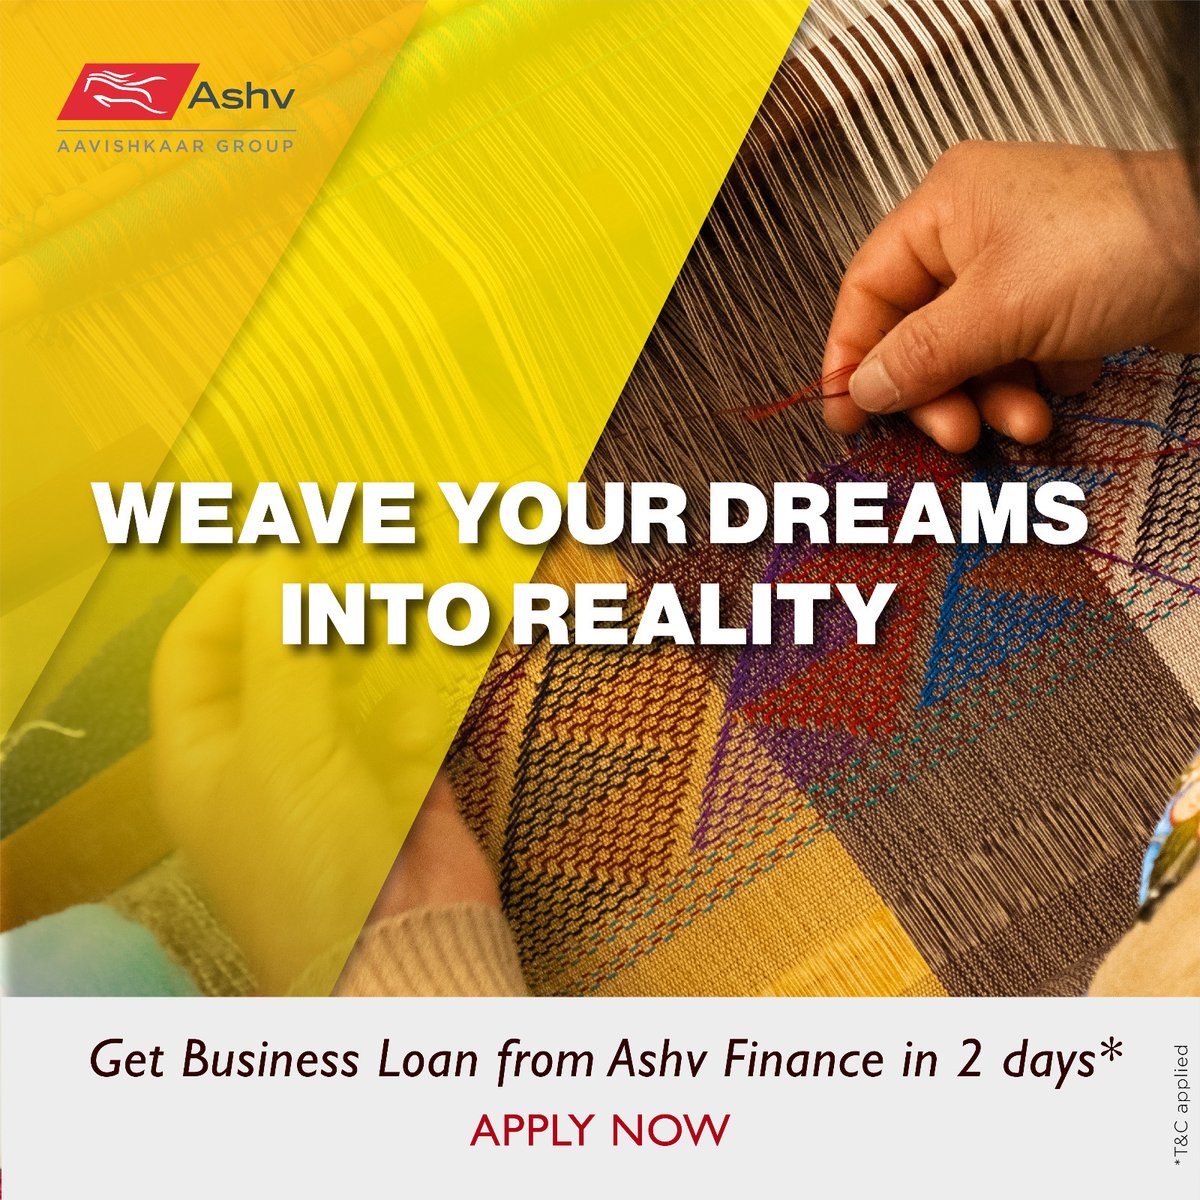 Weave your dreams into reality.
Apply for a hassle-free Business Loan from Ashv Finance: ashvfinance.com/apply-now
.
.
.
.
#AshvFinance #financeforsmallbusinessowners #BusinessLoans #smallbusinessloans #loansforsmallbusinesses #smeloans